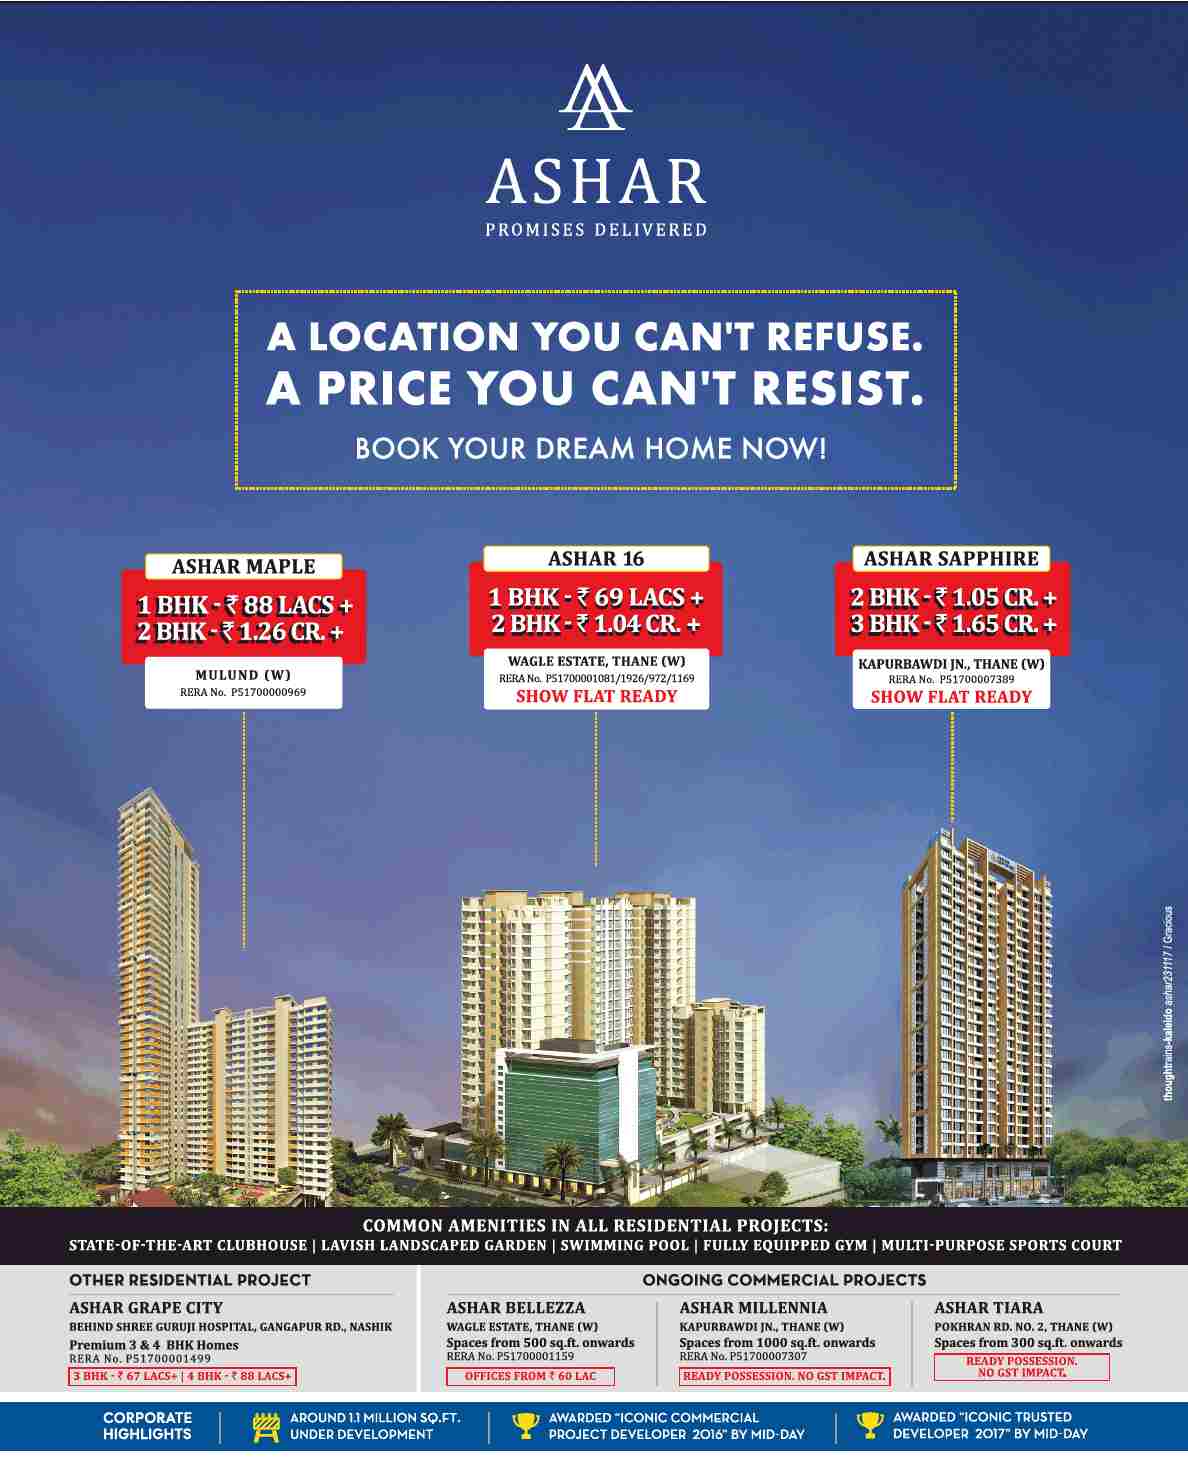 Invest in Ashar Properties in location you can't refuse & price you can't resist in Mumbai Update